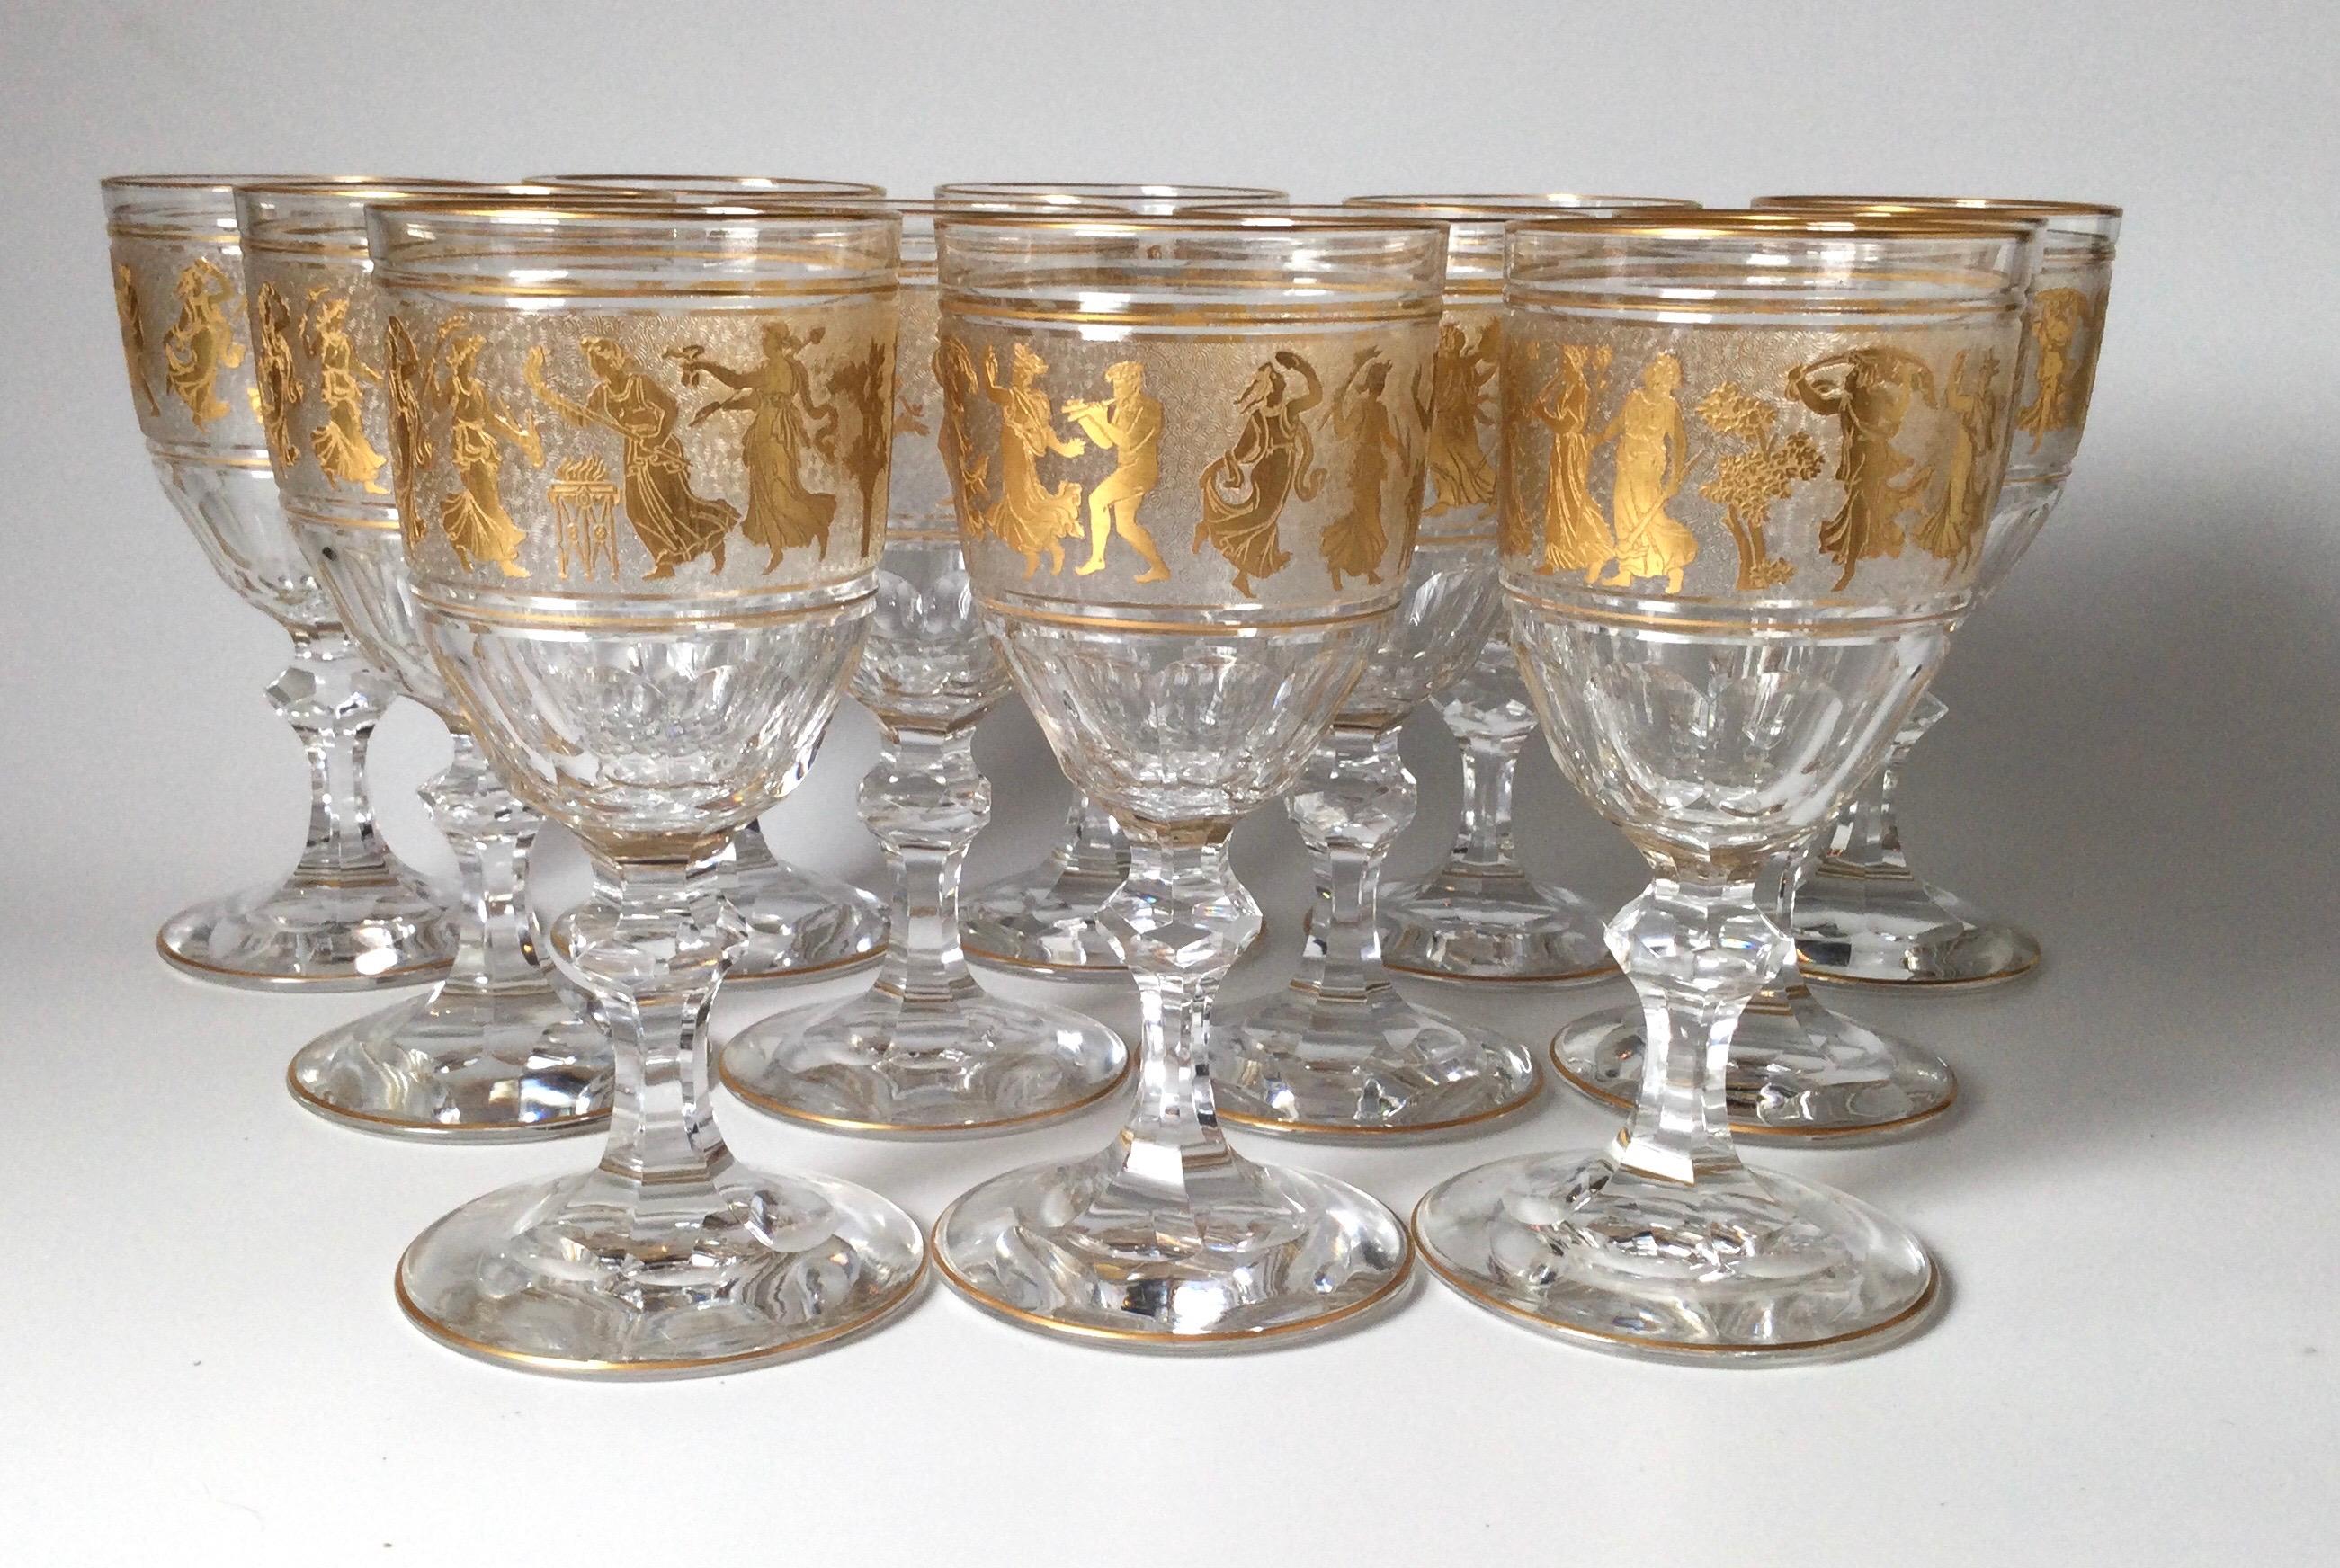 A magnificent set of 12 water or wine goblets made by Val St. Lambert. Each one is handblown, panel cut bowl with cameo cut frieze of Roman figures embellished with gold leaf. This pattern is one of Val St. Lambert's finest and presents an opulent